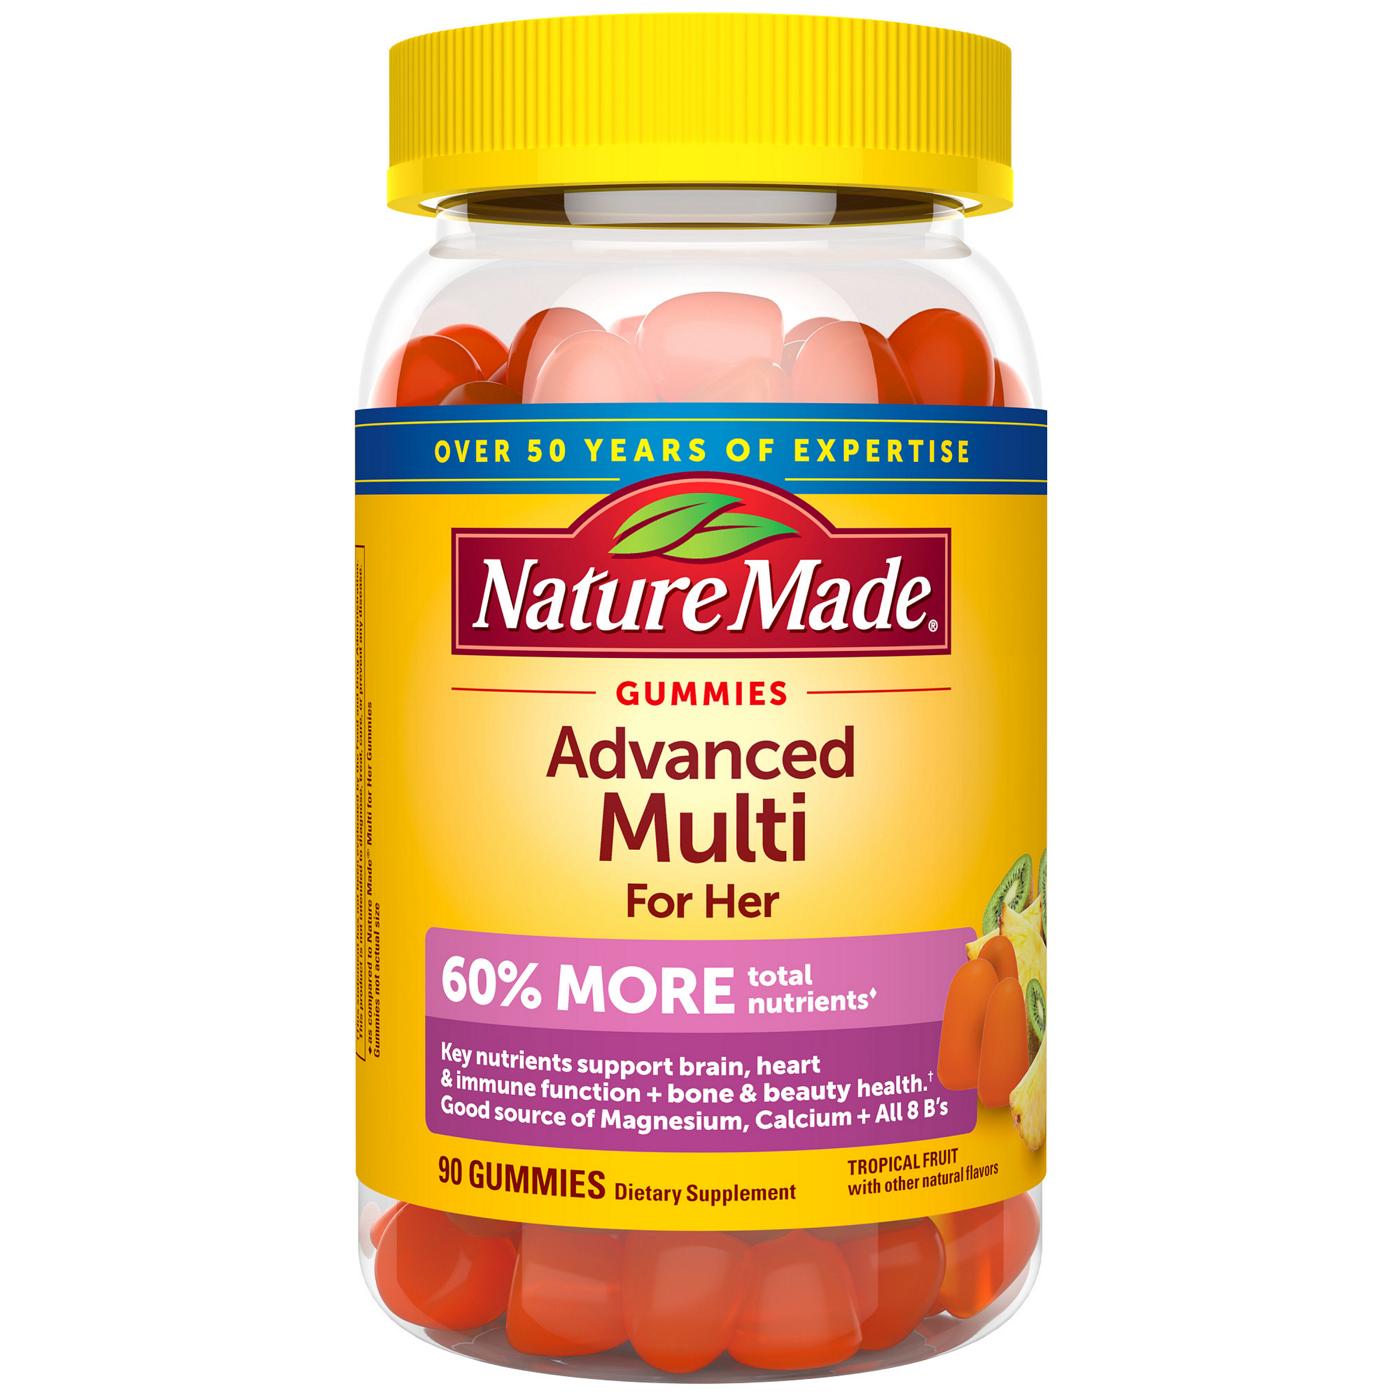 Nature Made Advance Multi For Her Gummies - Tropical Fruit; image 1 of 4